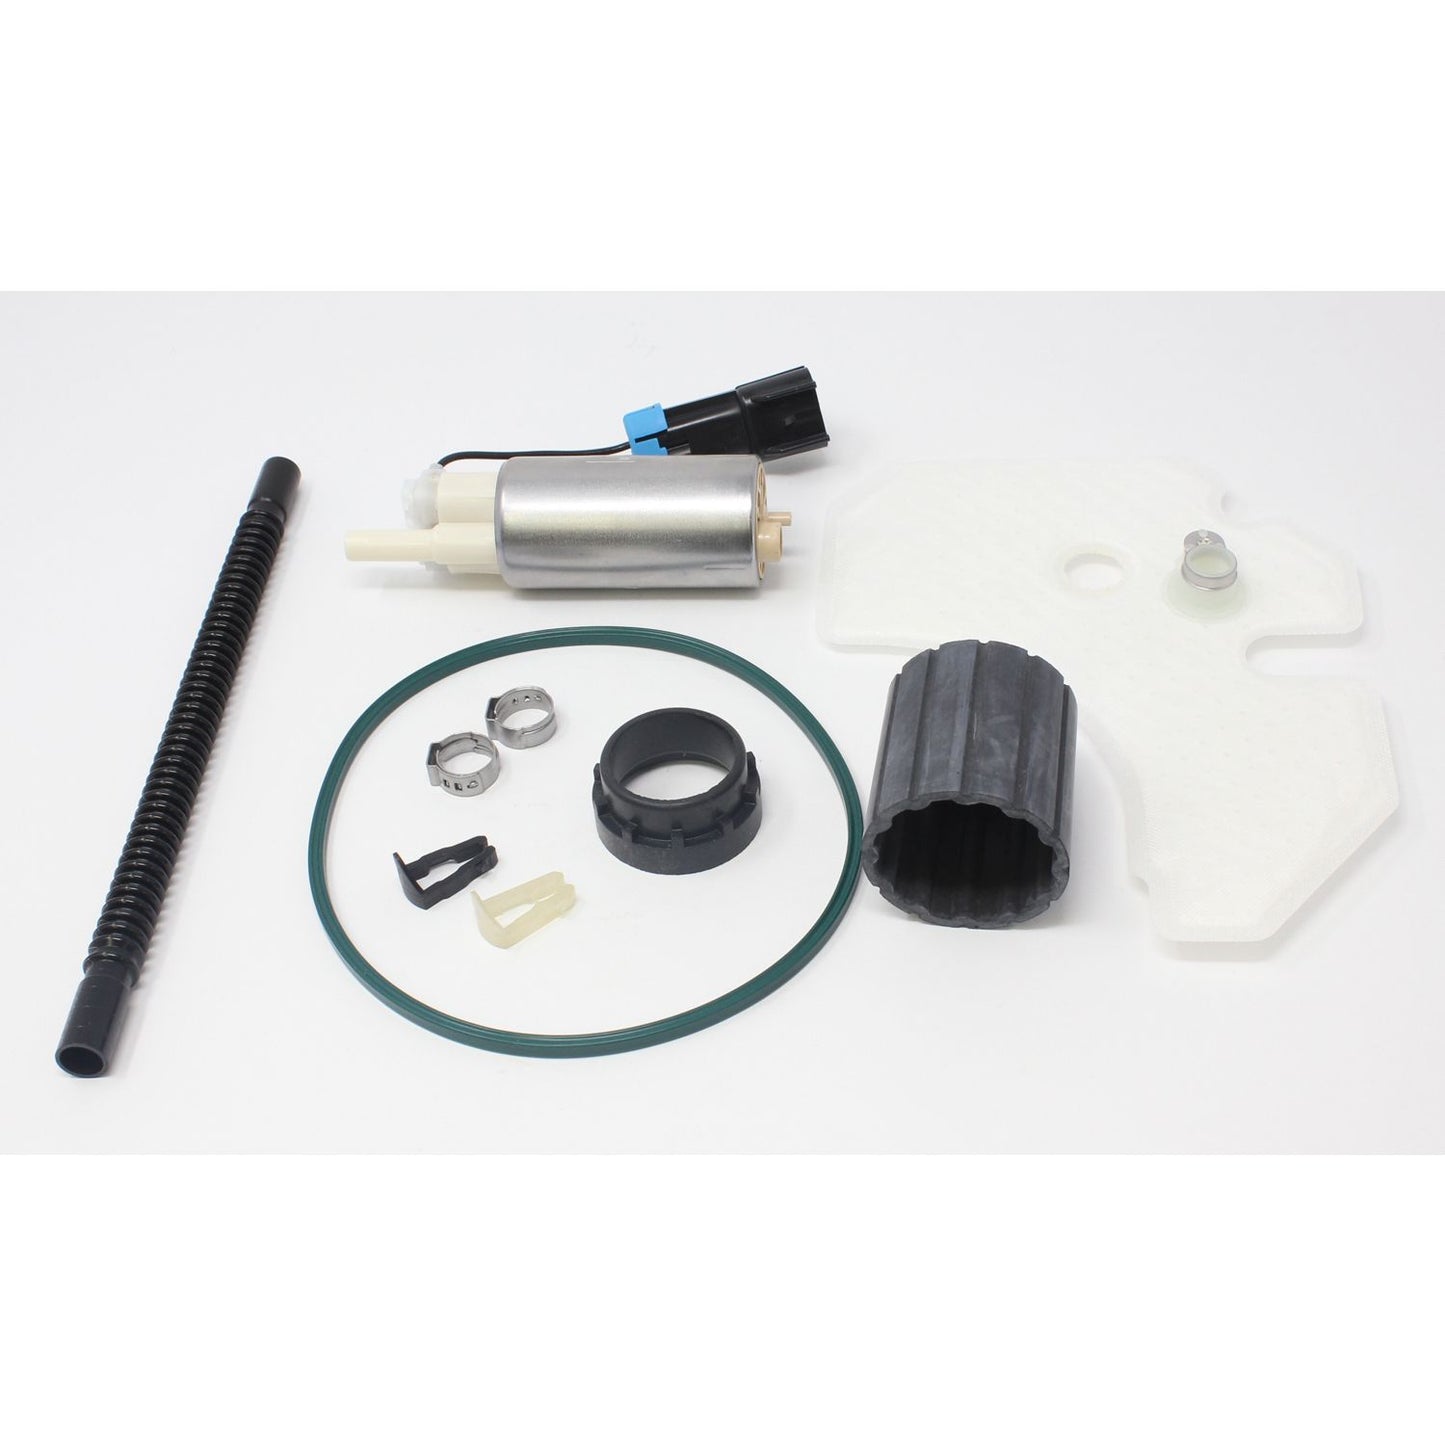 TI Automotive Stock Replacement Pump and Installation Kit for Gasoline Applications TCA930